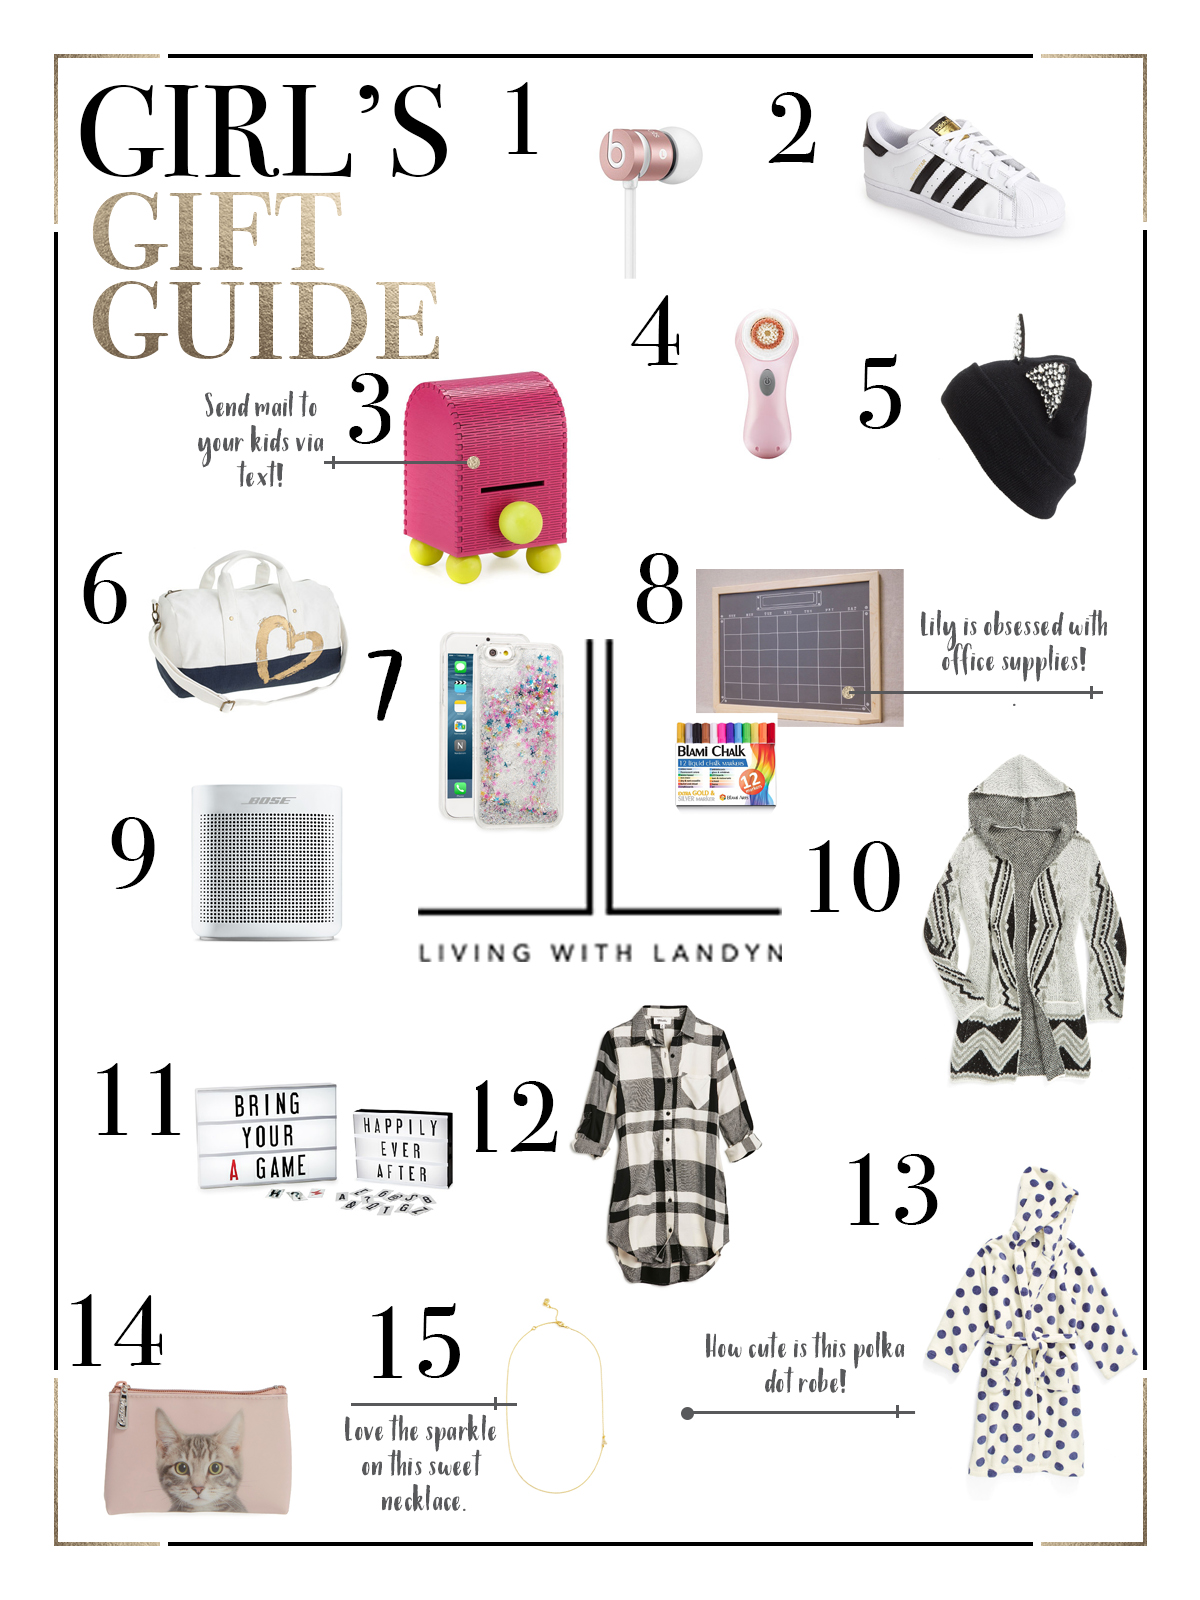  Christmas gift guide for a tween girl what to get a tween girl for christmas 